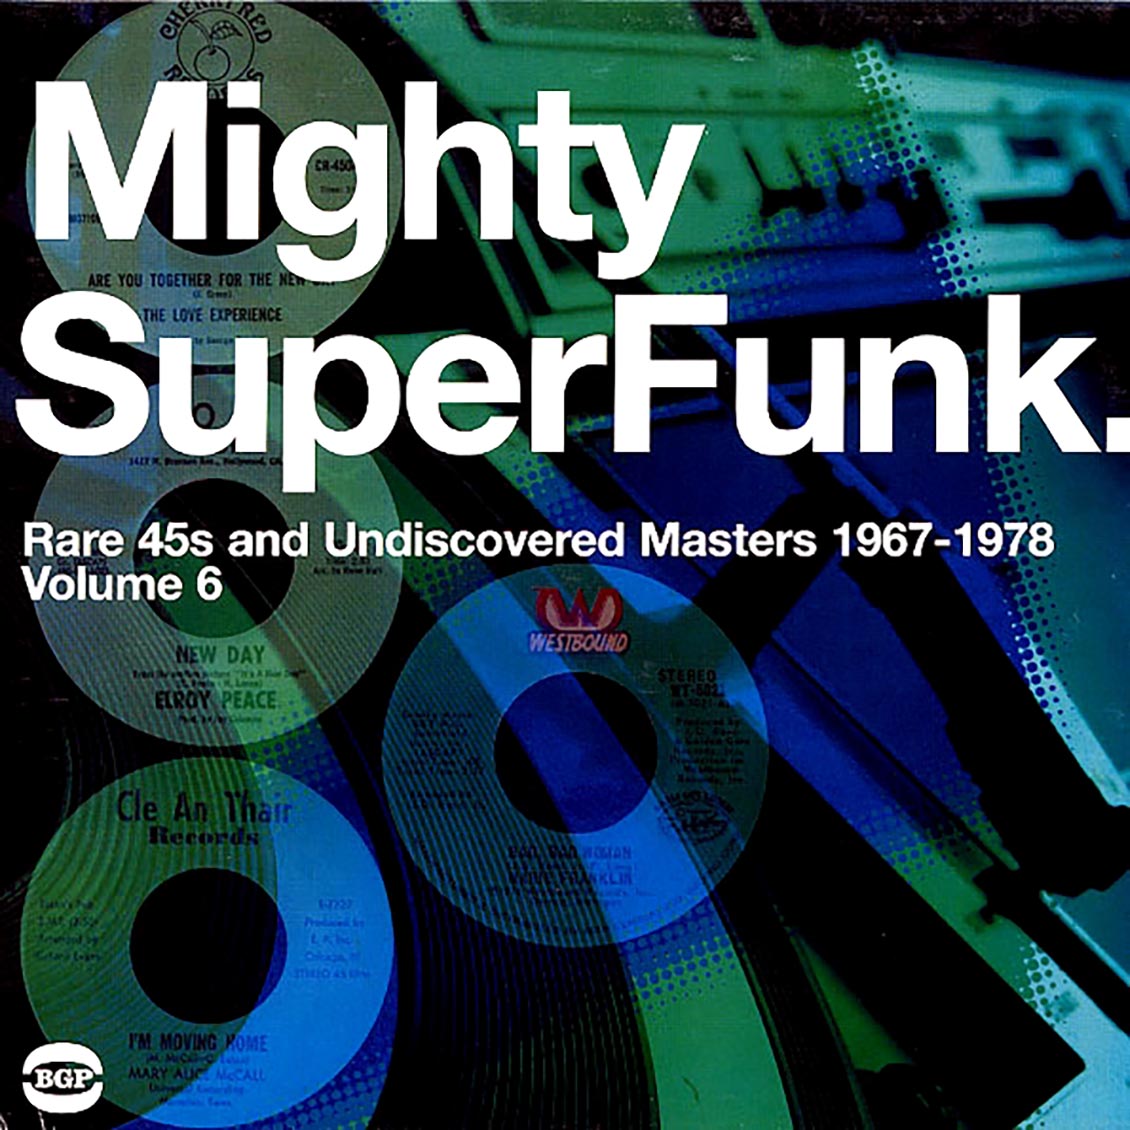 The Love Experience, The Phillips Brothers, Kim Tamanga, Etc. - Mighty Superfunk: Rare 45s And Undiscovered Masters 1967-1978 Volume 6 (2xLP) - Vinyl LP